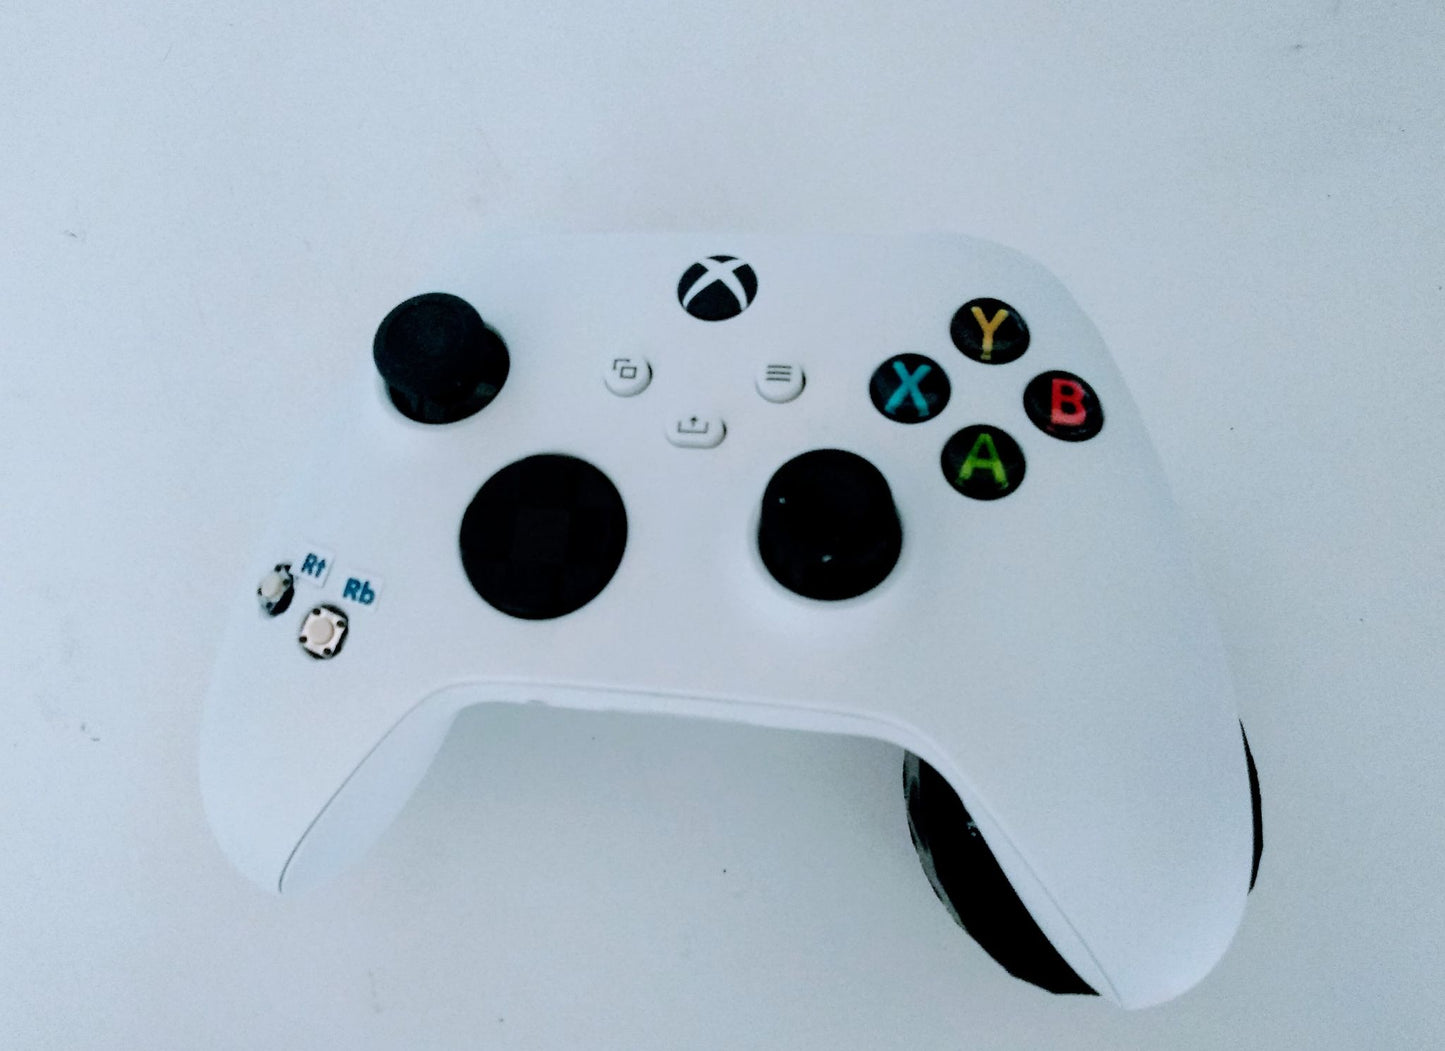 XBOX controller suitable for left hand